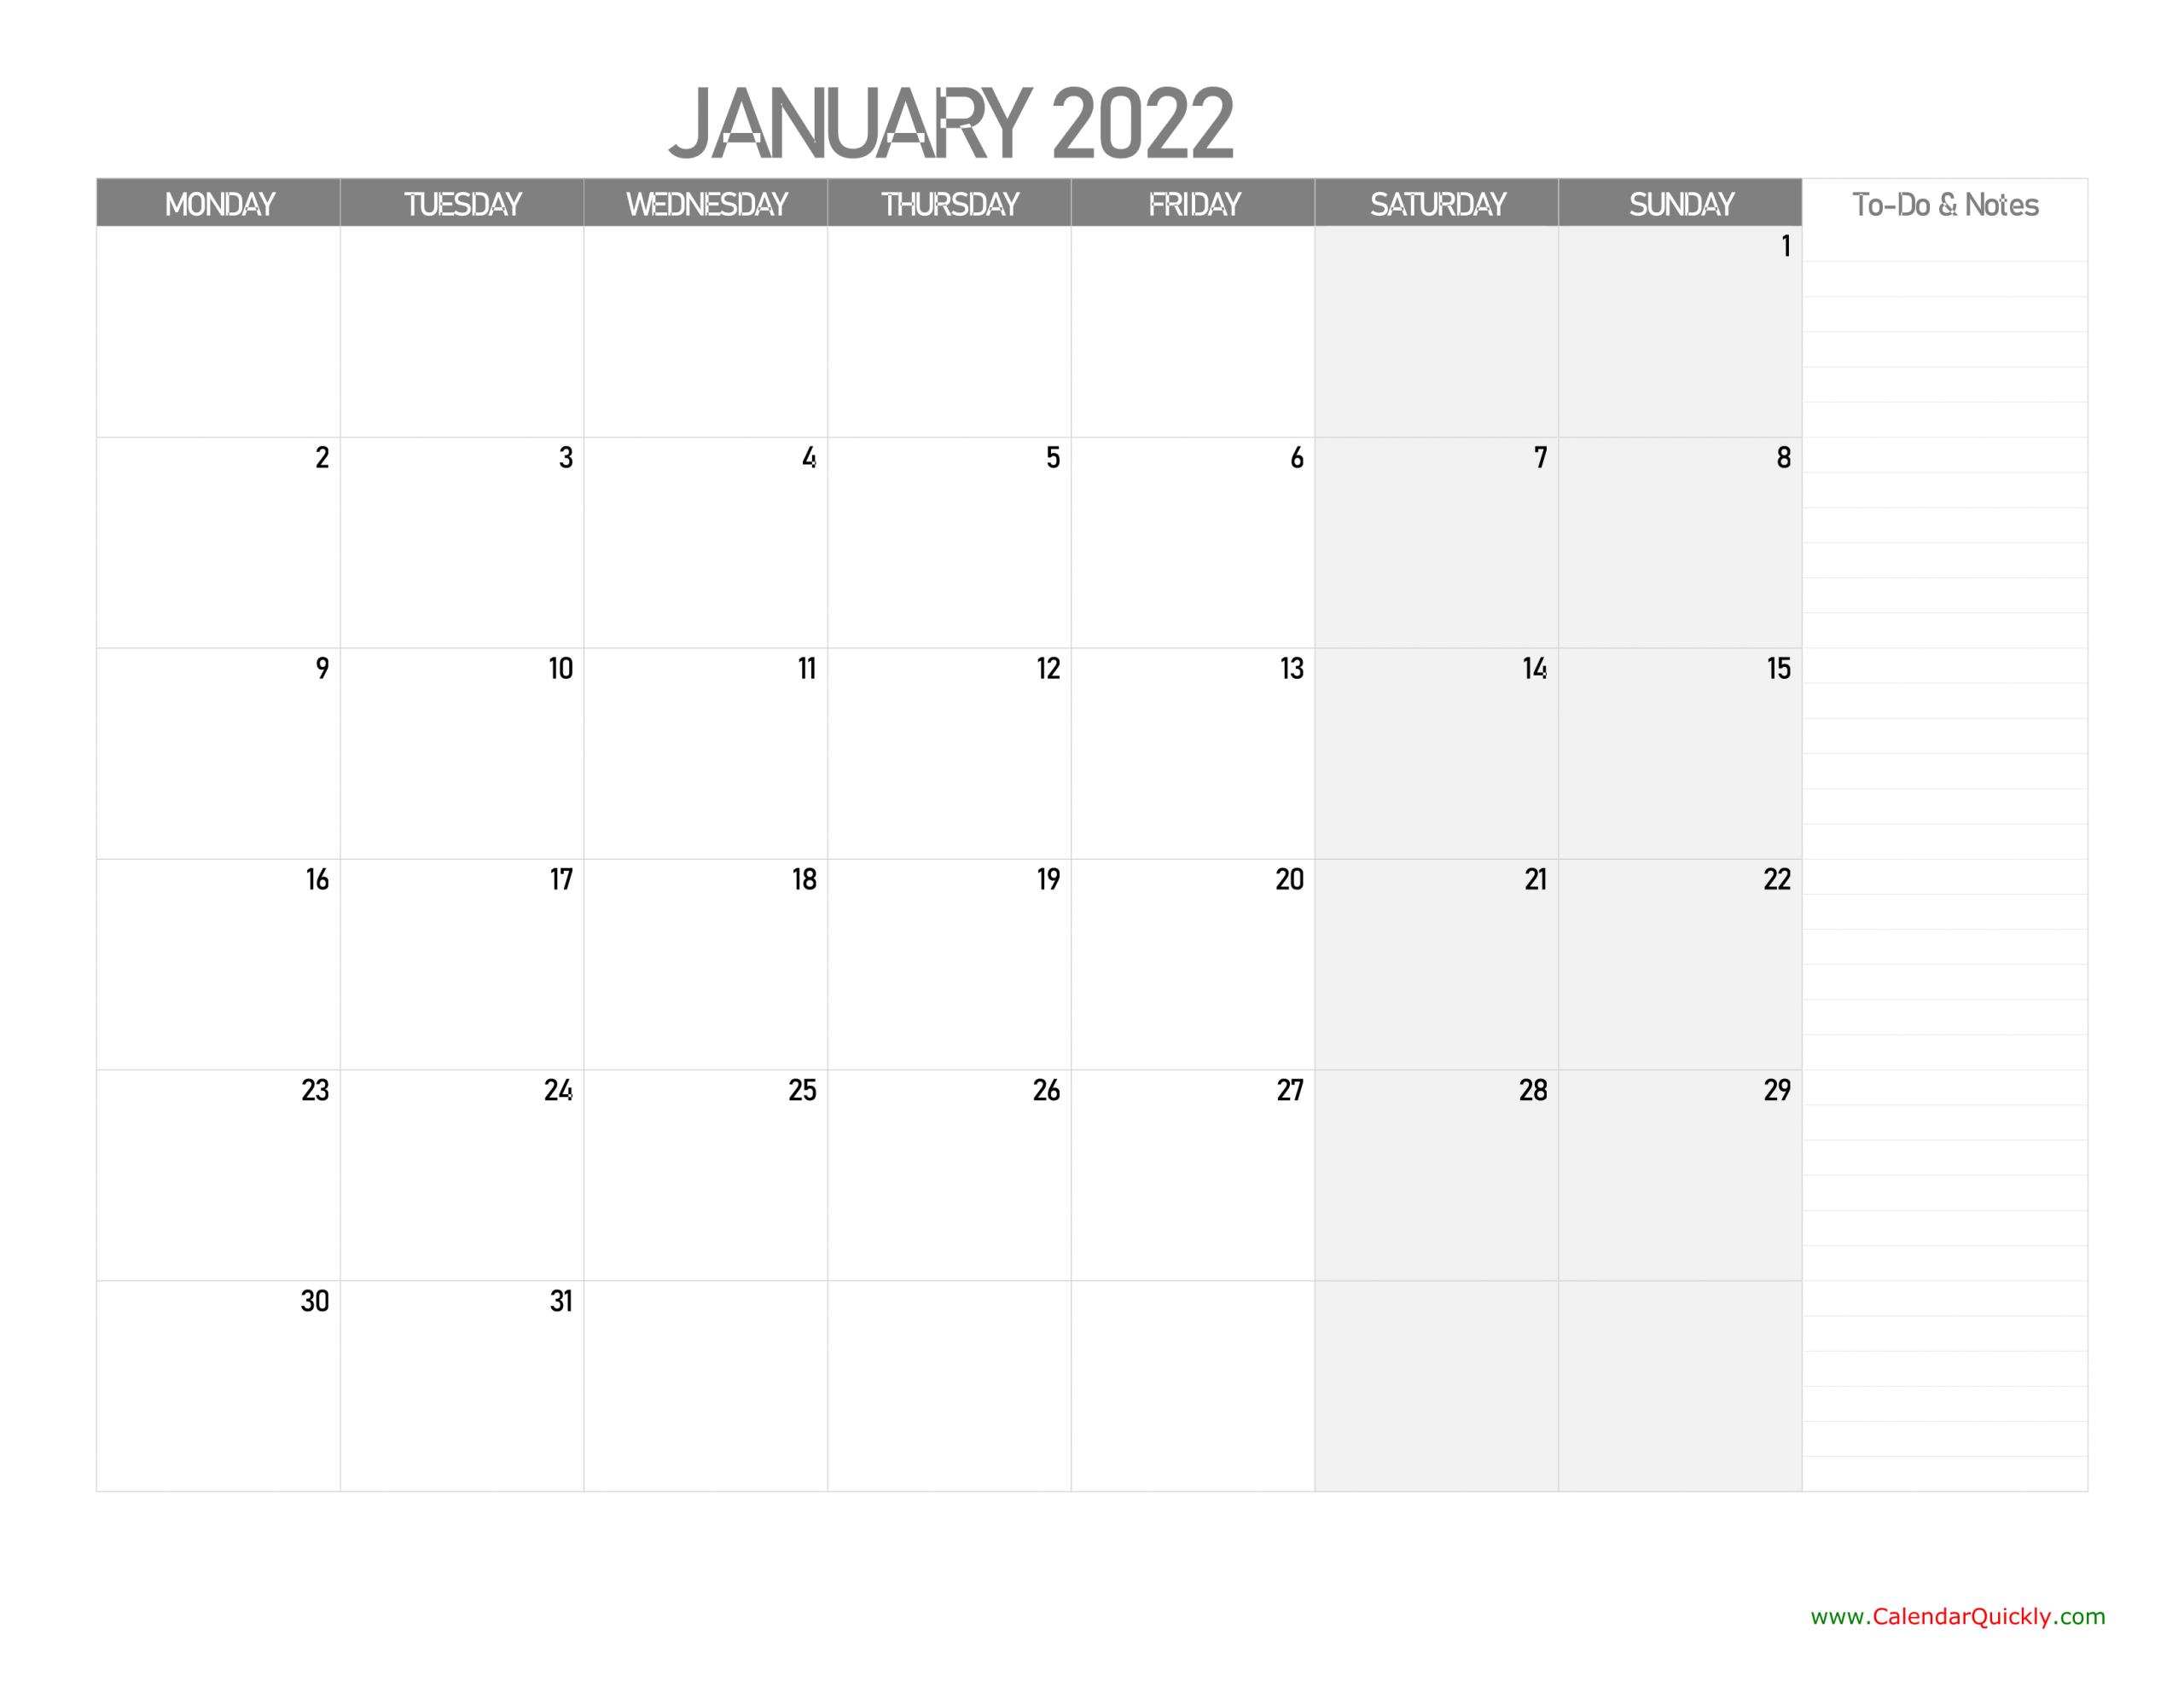 Monthly Monday Calendar 2022 With Notes | Calendar Quickly